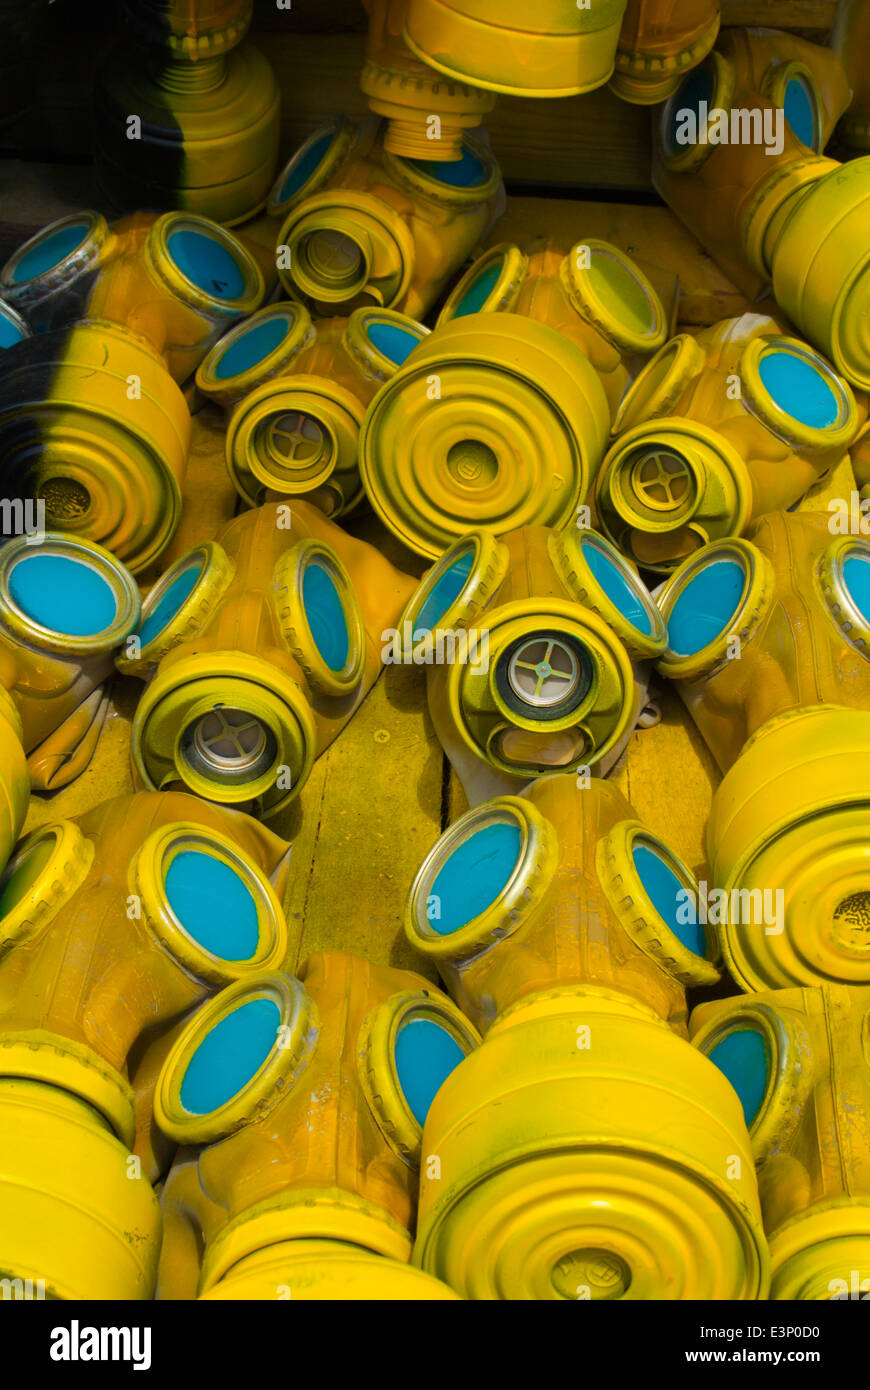 Gas mask sculpture made up of 400 gas masks on May 10 2014, NKD park, central Sofia, Bulgaria, Europe Stock Photo